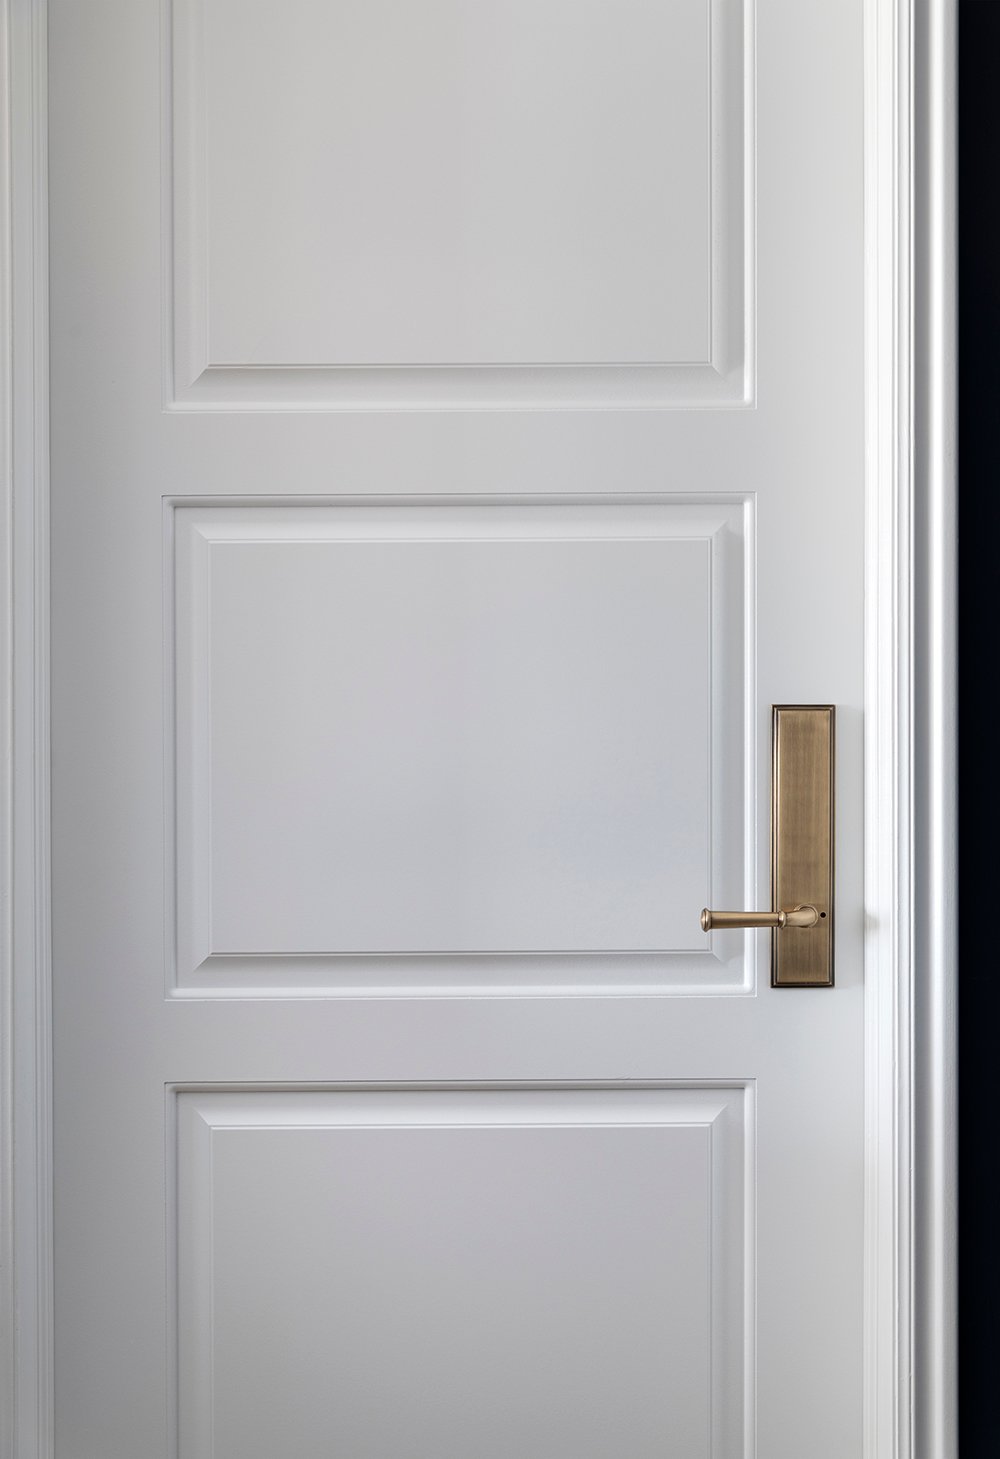 How to Order & Replace An Interior Door (With Designer Recommendations) - roomfortuesday.com